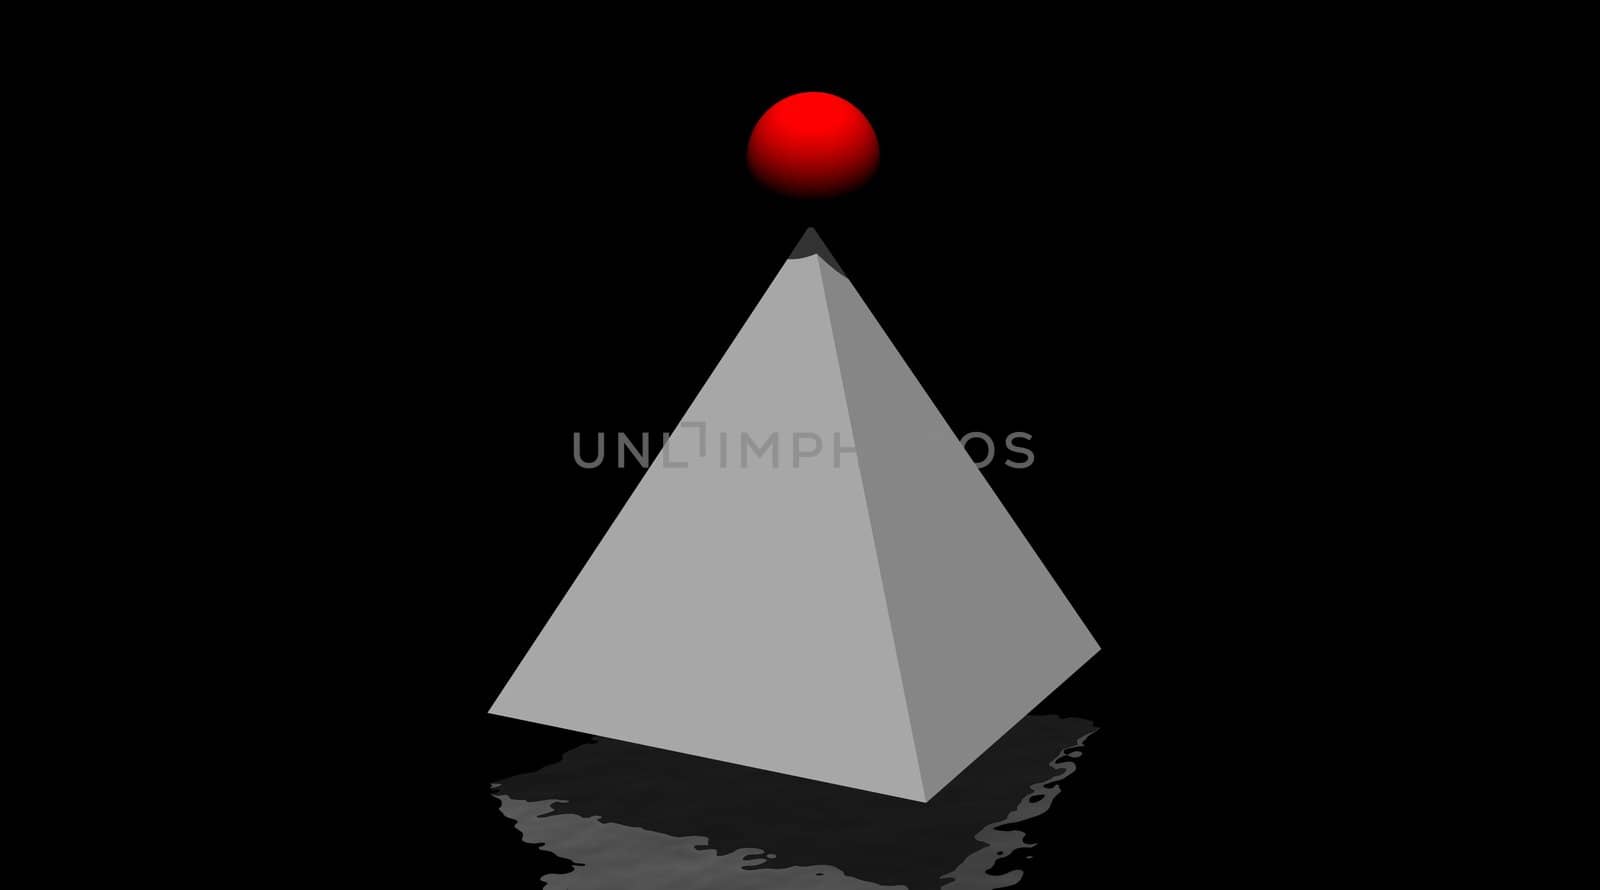 Grey pyramid and small red winning ball on it in black background and upon the dark reflecting sea